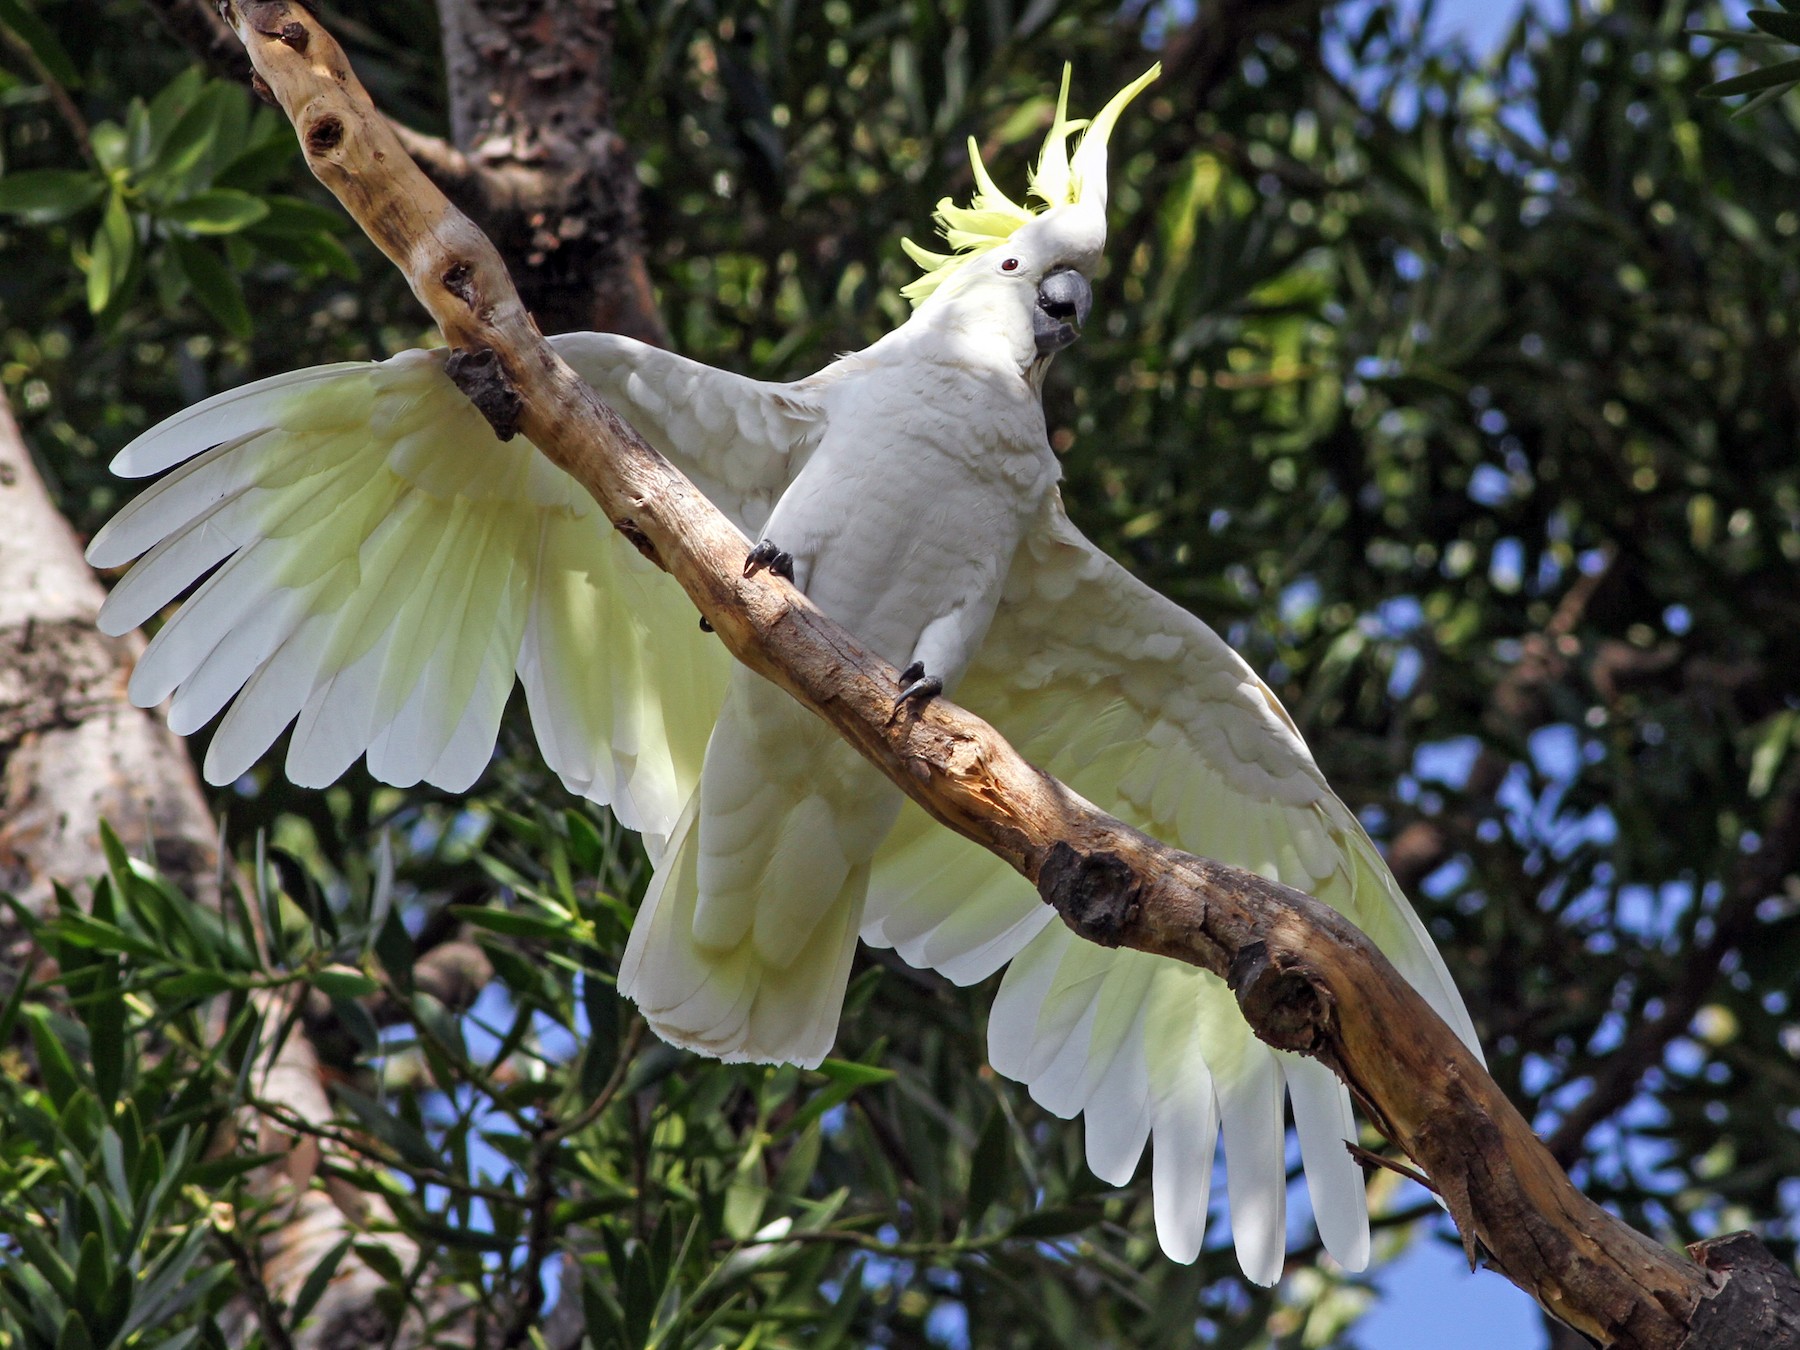 sulfur crested cockatoo sounds